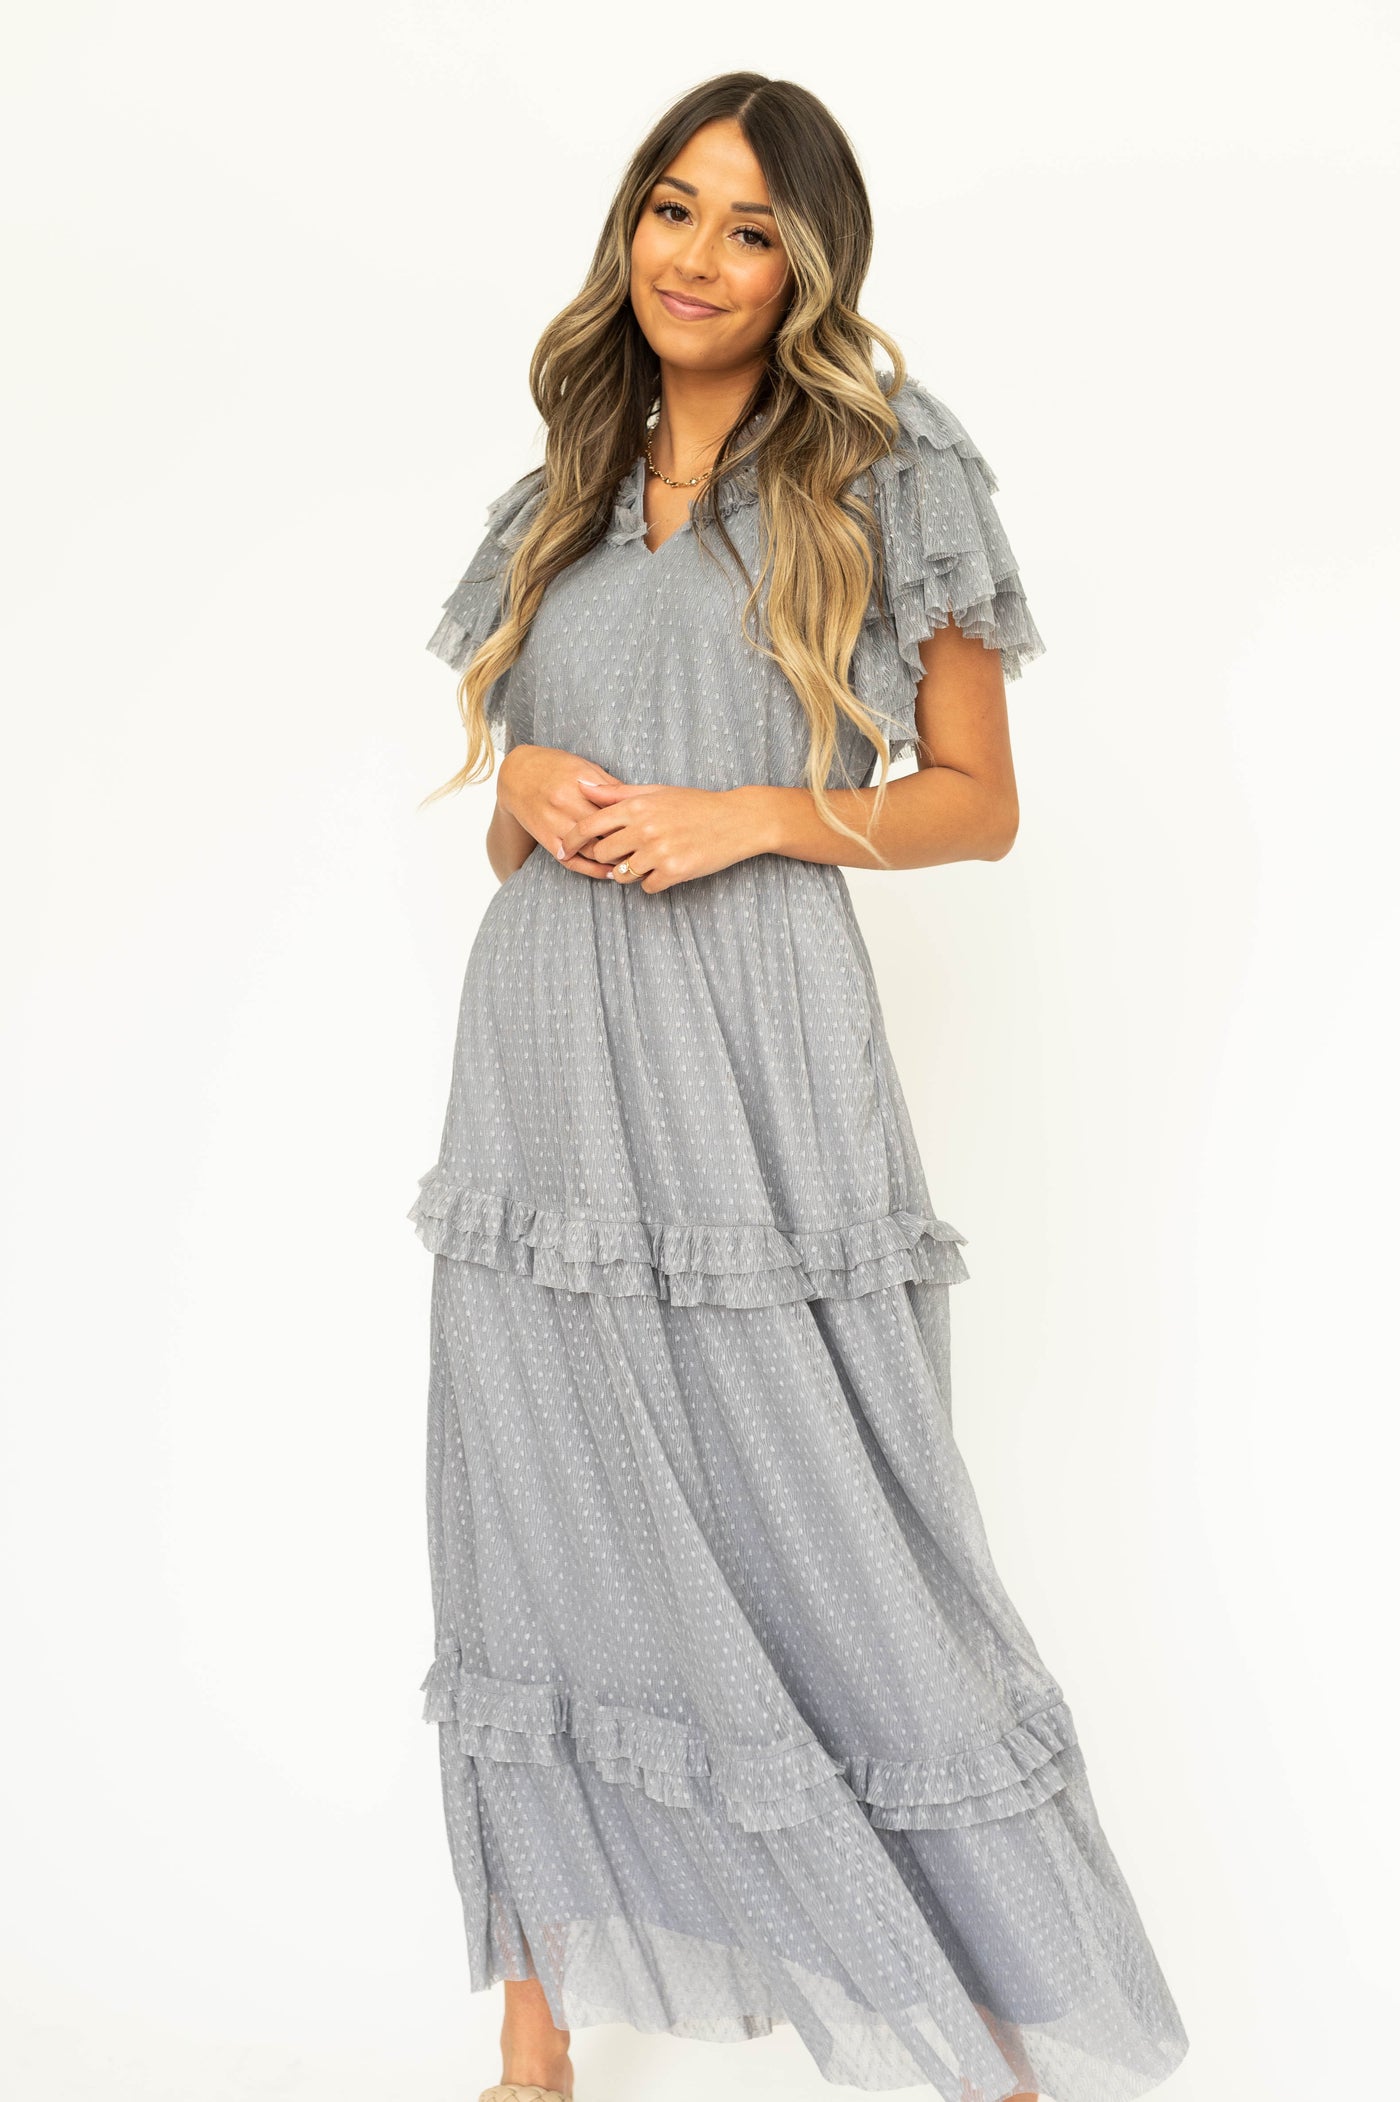 blue gray lace short sleeve dress with pockets, ruffles on sleeves and neck.